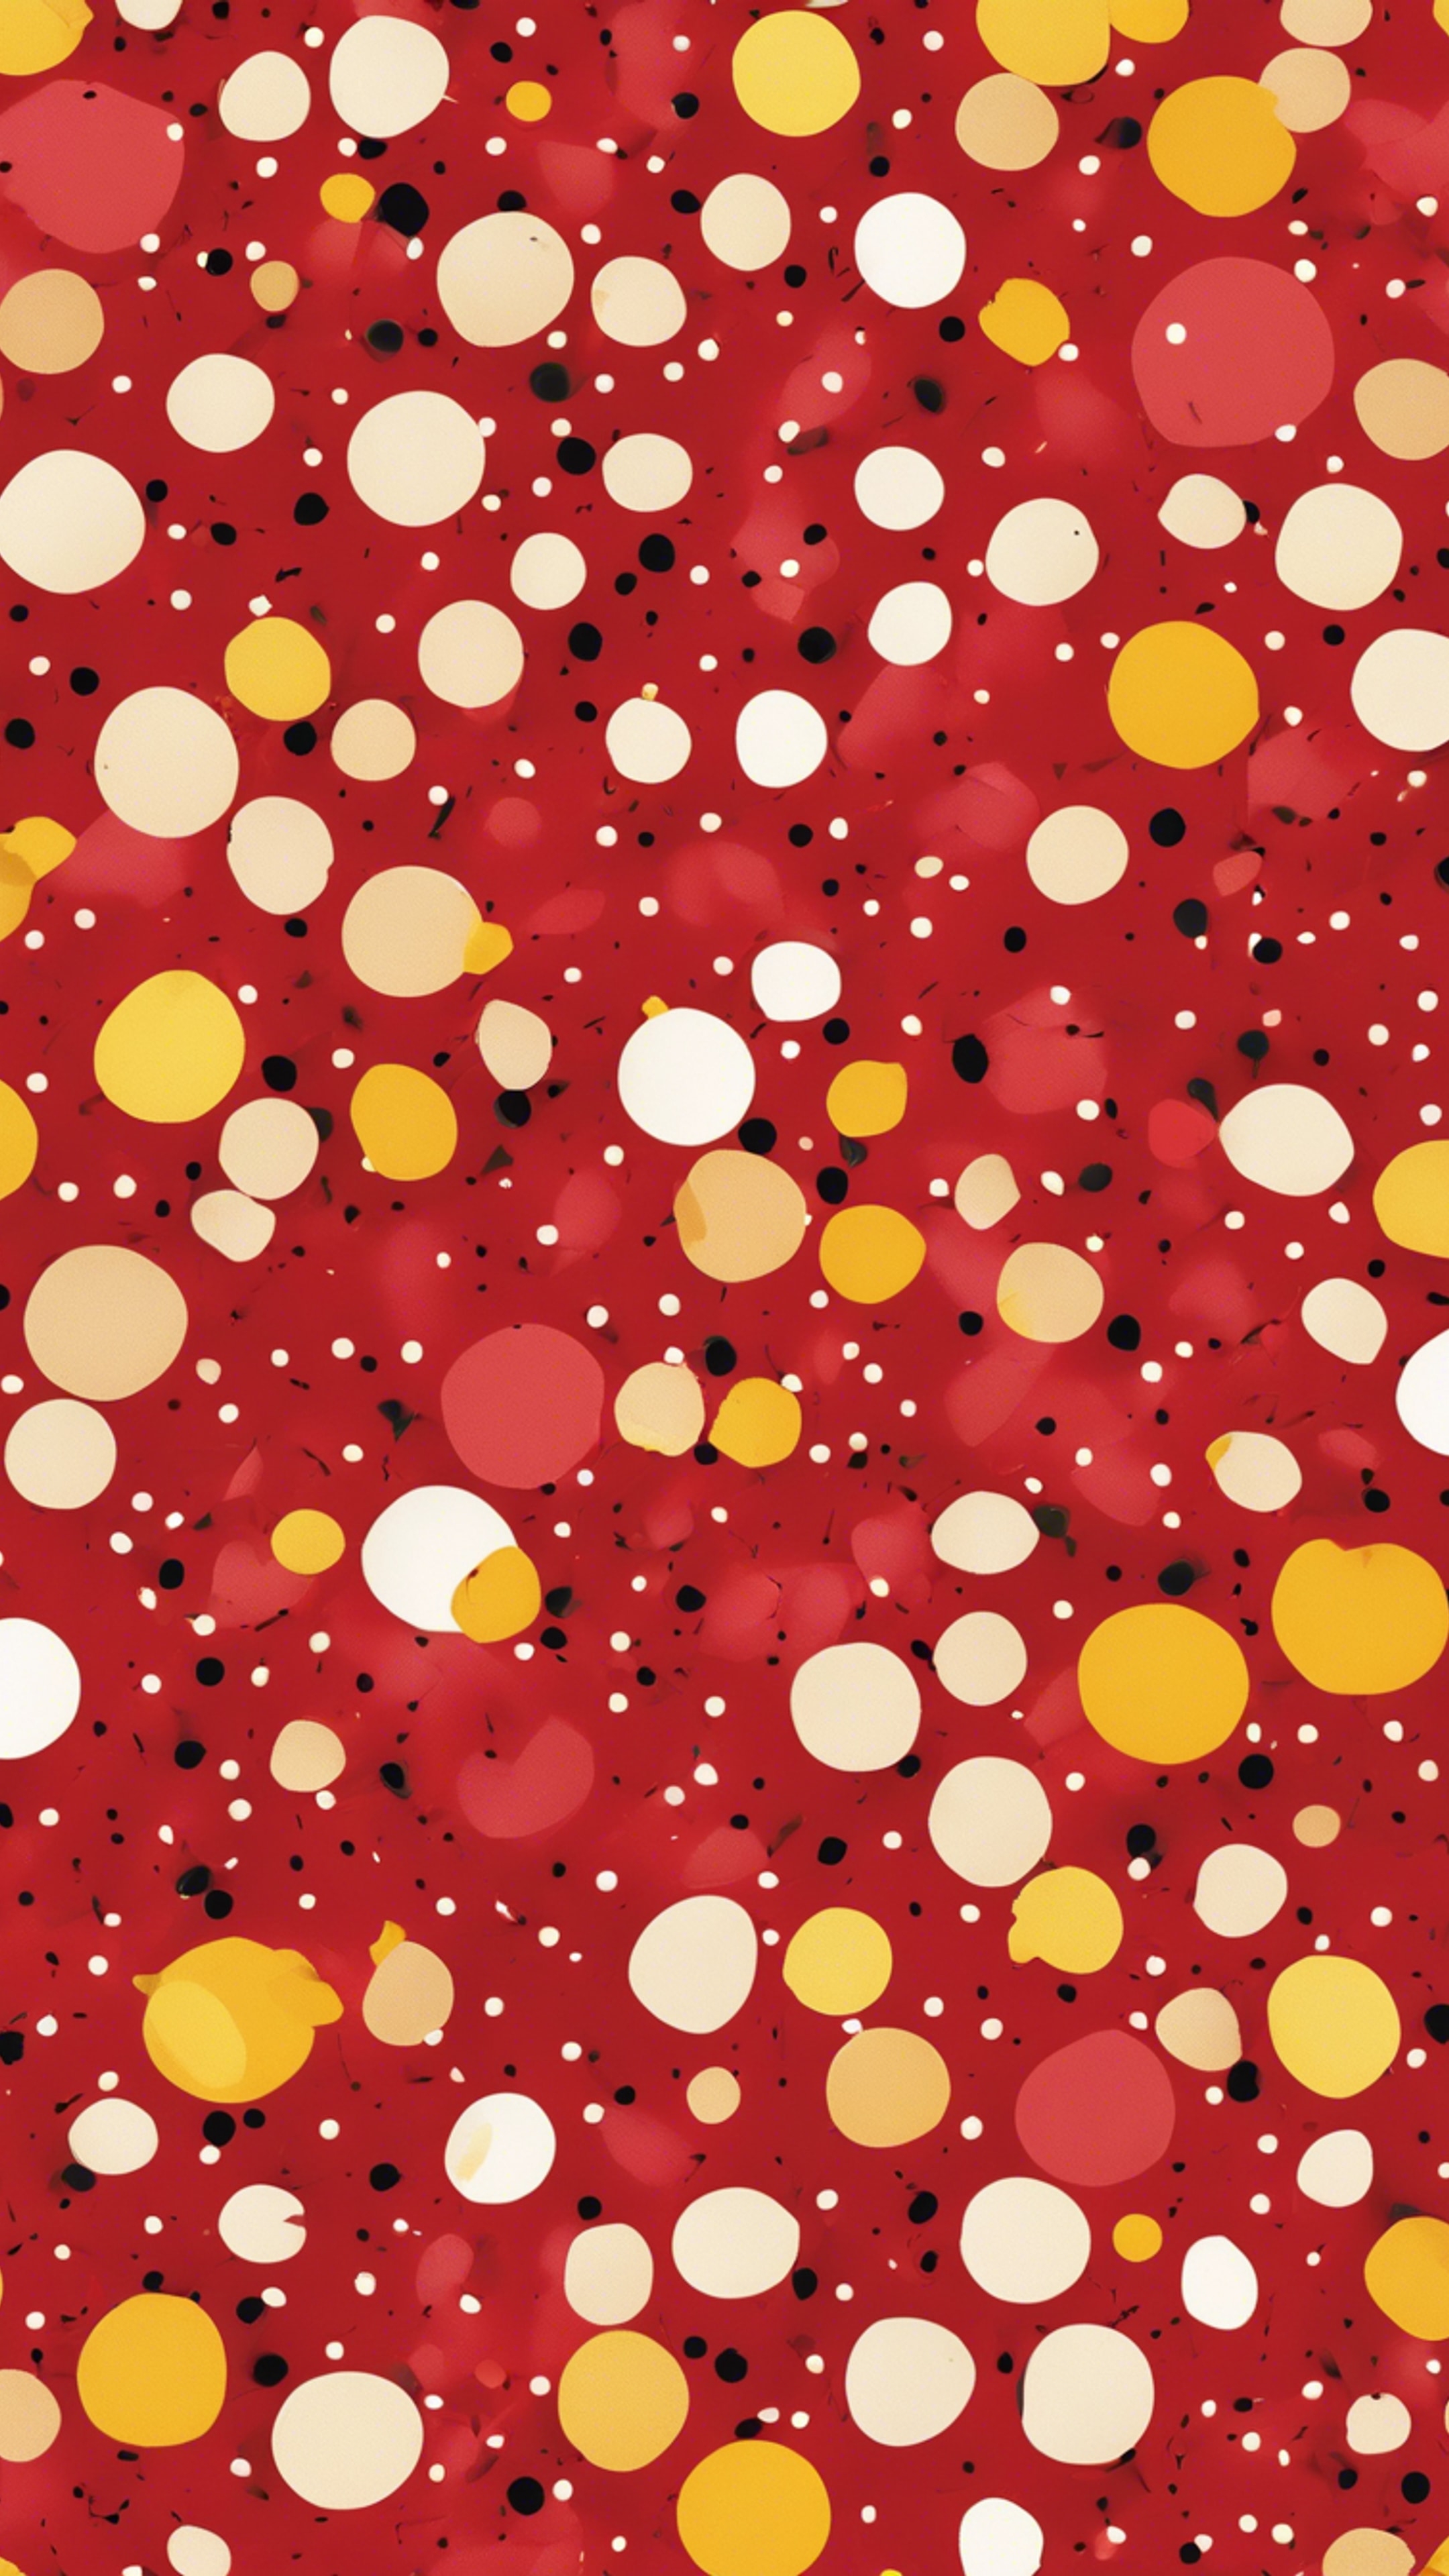 A seamless pattern of vibrant red and vivid yellow, polka dots scattered randomly.壁紙[206bafc01adc43569588]